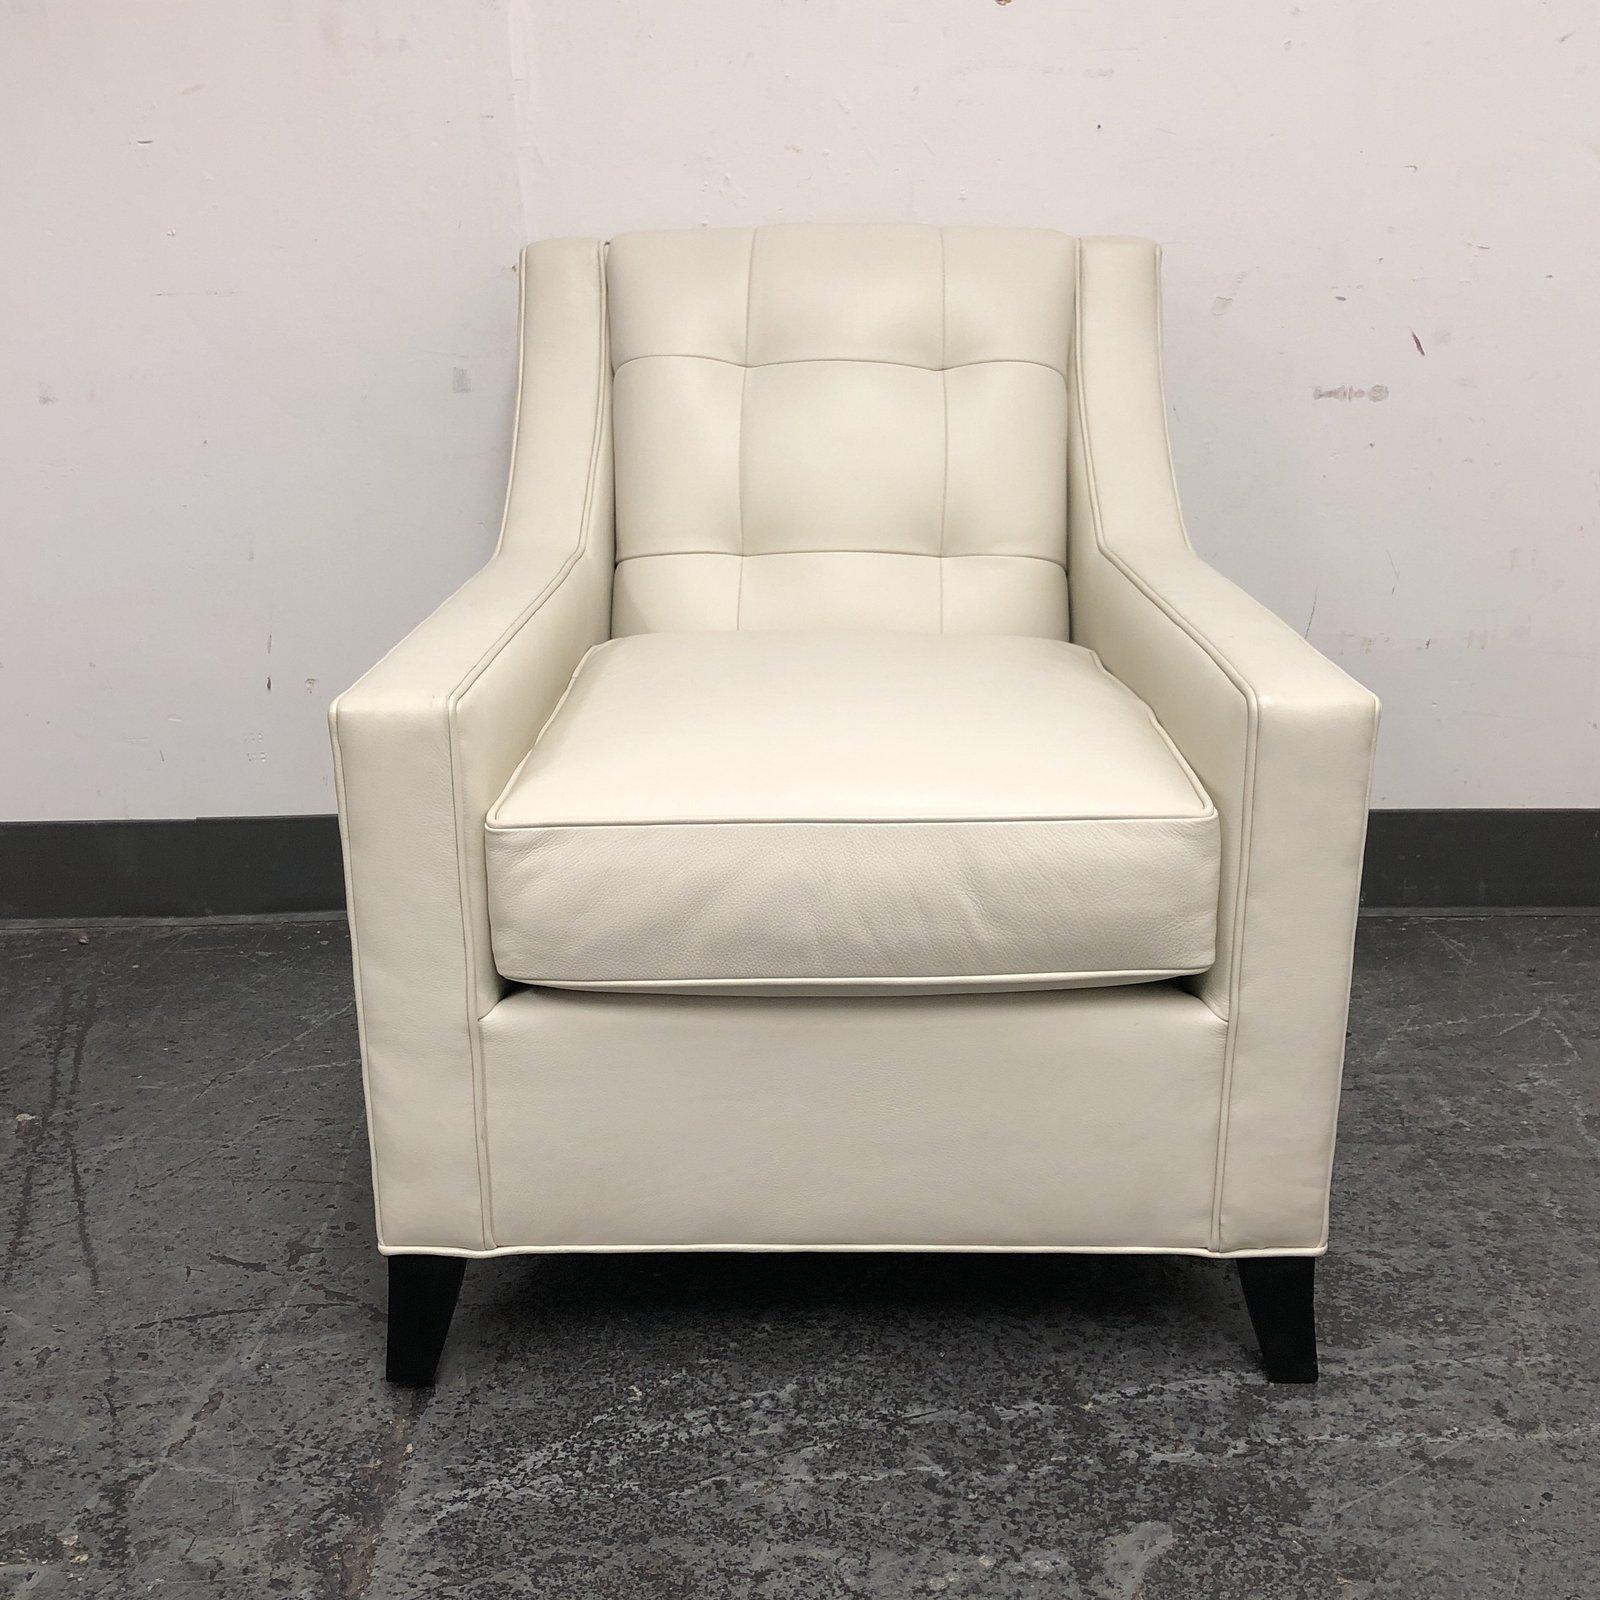 An accent Leather lounge chair in style 112. Upholstered in an grade two maxima Iceberg 3943 leather. Leg finish is #10 Ebony and accented with a #9 nailhead trim polished nickel. Includes a tufted back. Measures: Arm height 24 inches, seat height